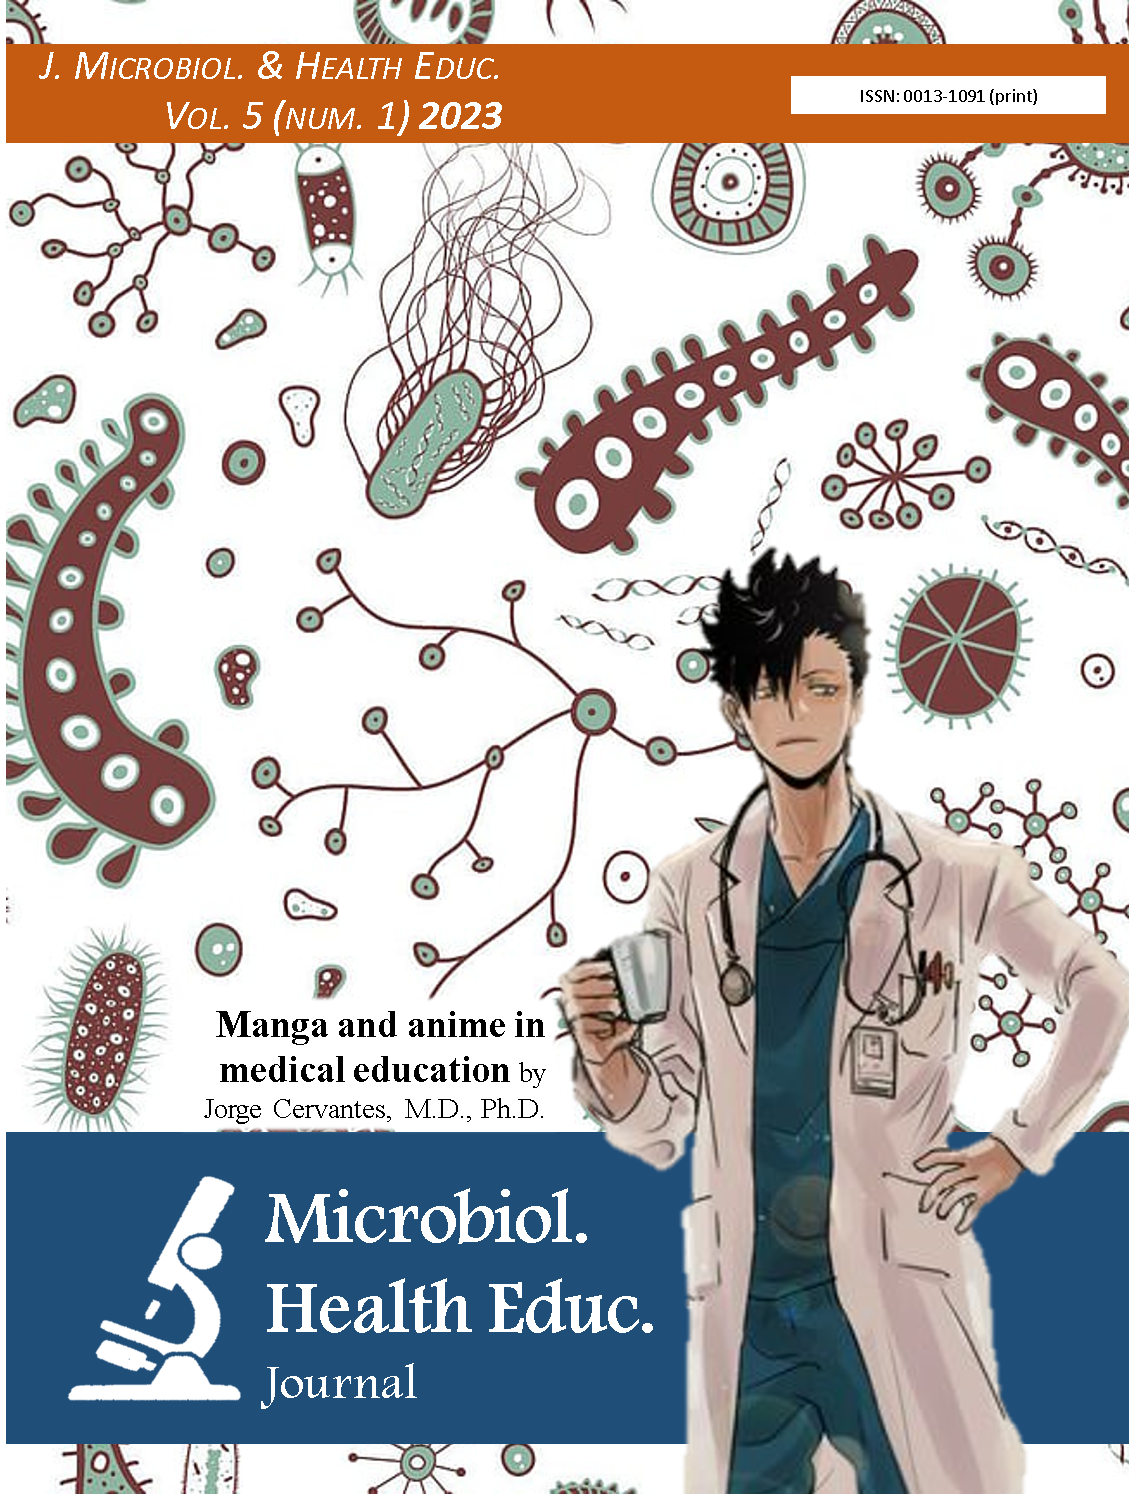 Cover of the Journal of Microbiology and health education magazine volume 5 number 1 of the year 2023, on the cover an image of a doctor illustrated in "manga" or cartoon design, alluding to the article by doctor Jorge Cervantes entitled Manga and anime in medical education